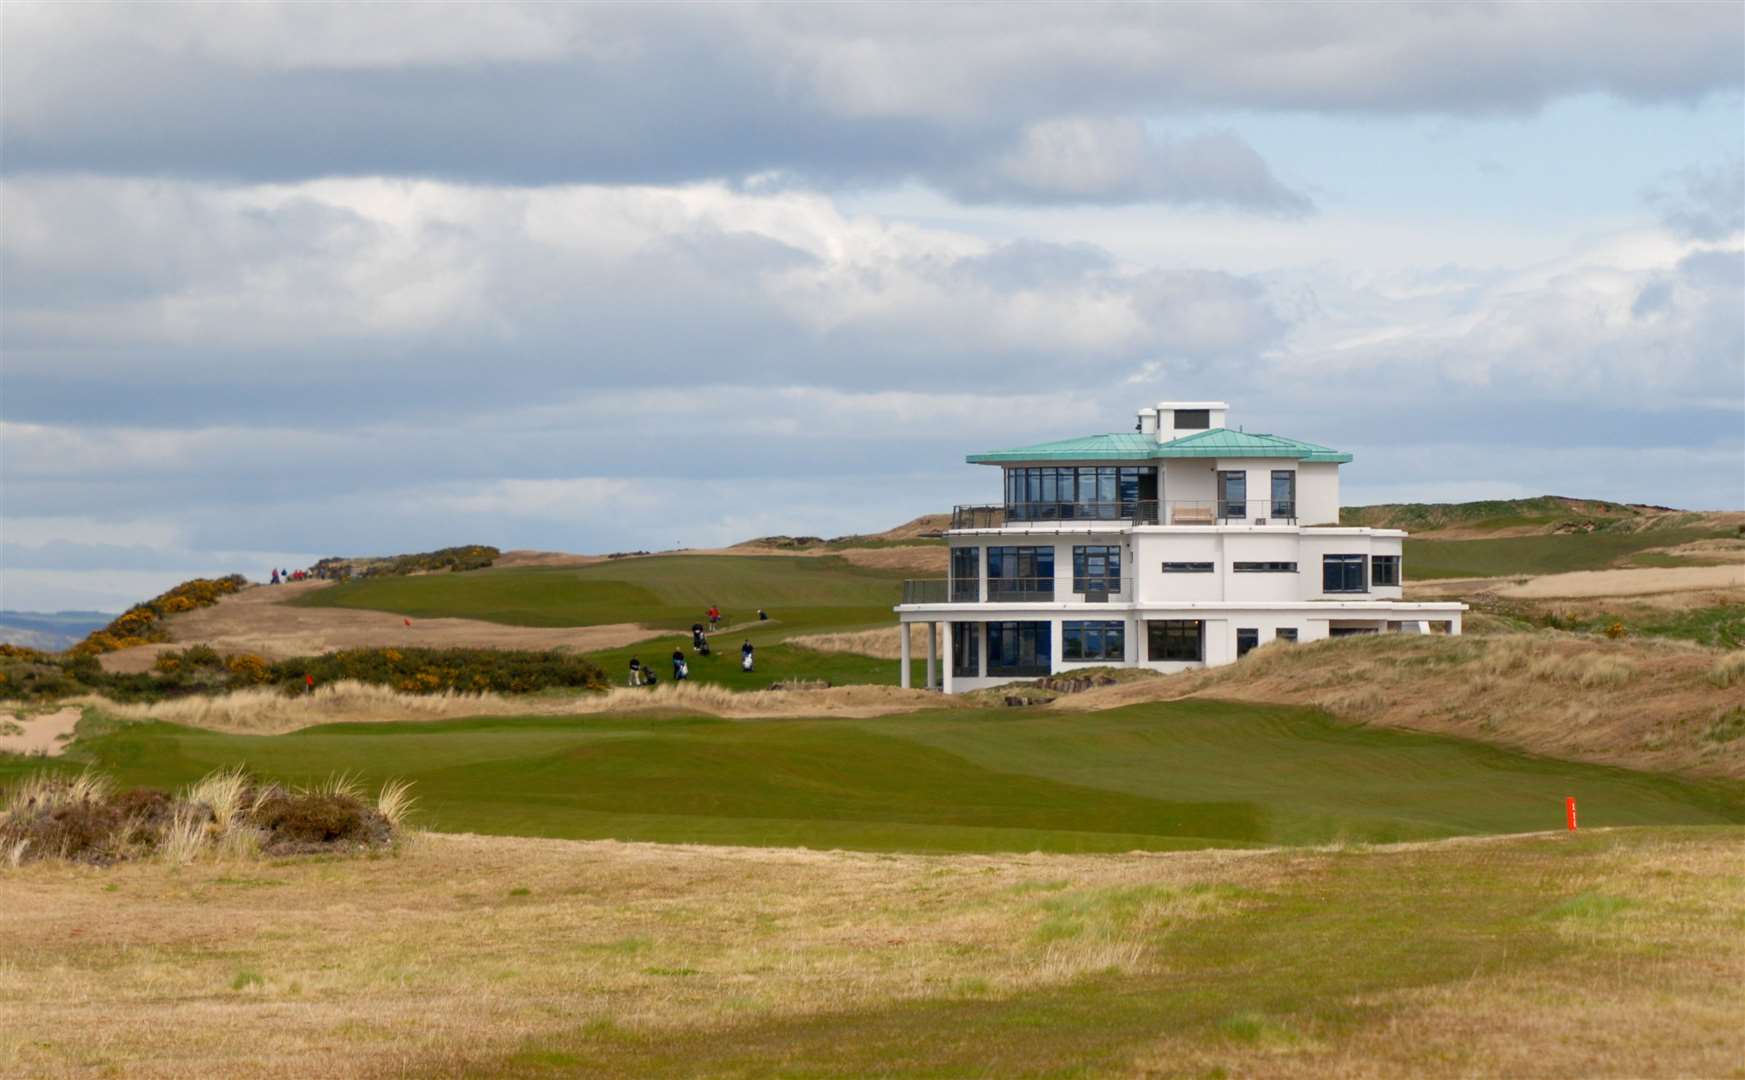 Castle Stuart Golf Club will host the event in August.